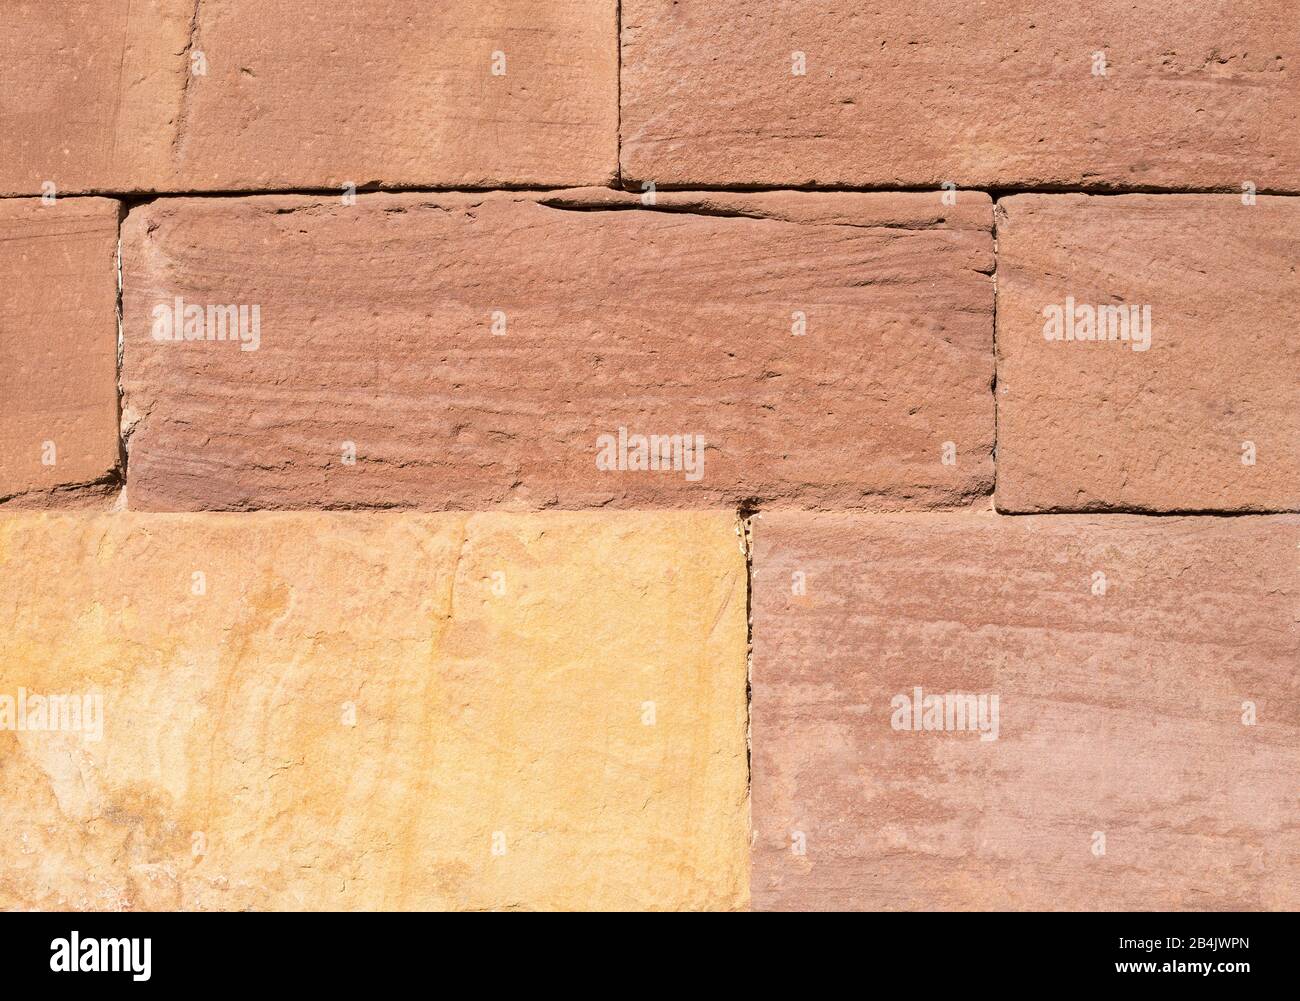 sandstone block wall in red and yellow shades for background Stock Photo